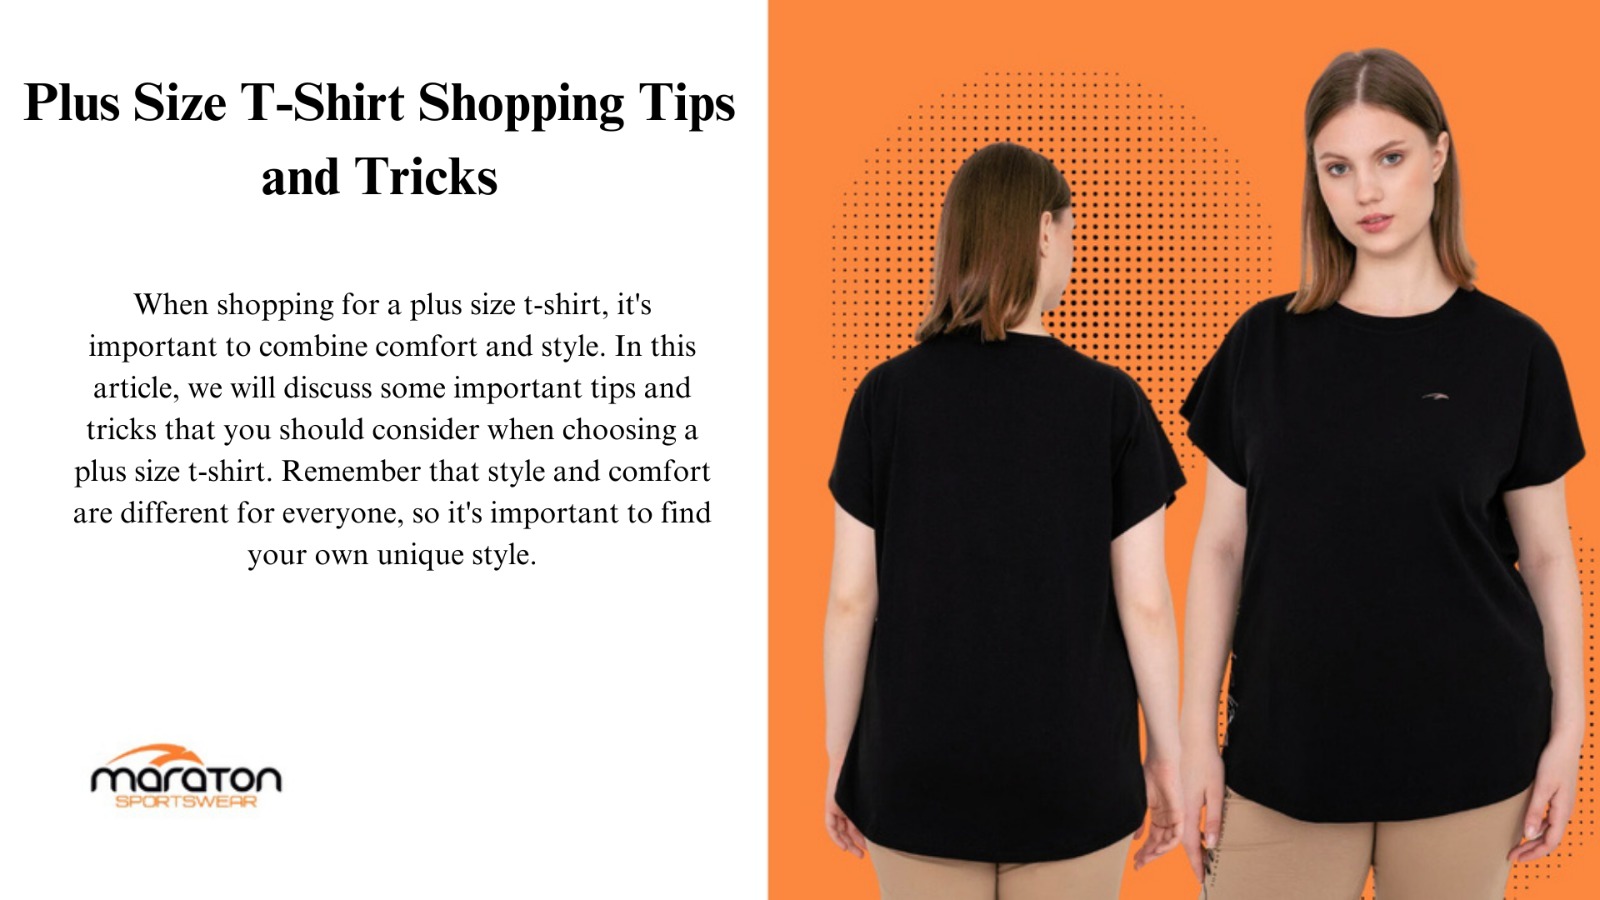 Plus Size T-Shirt Shopping Tips and Tricks